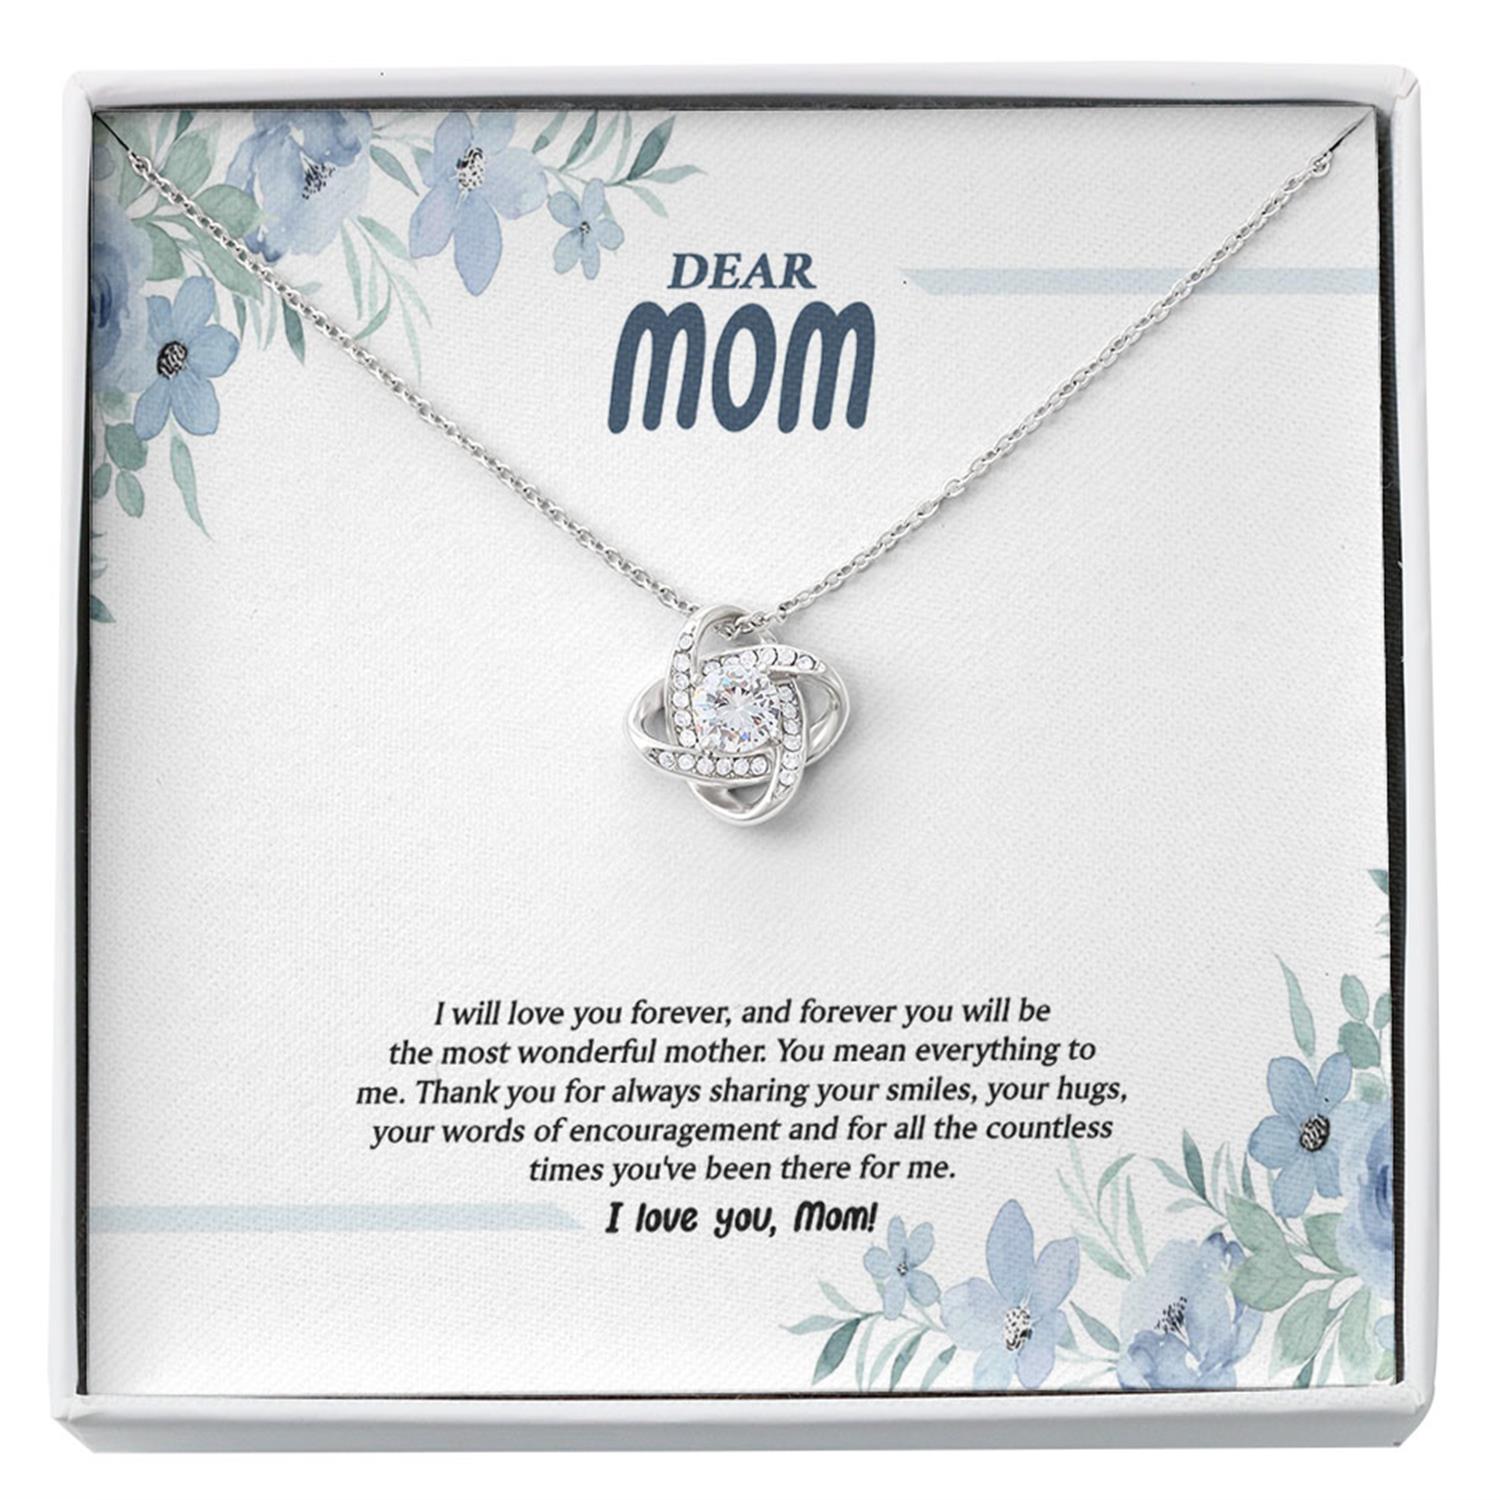 Mom Necklace - Dear Mom Necklace - Necklace With Gift Box For Christmas Custom Necklace